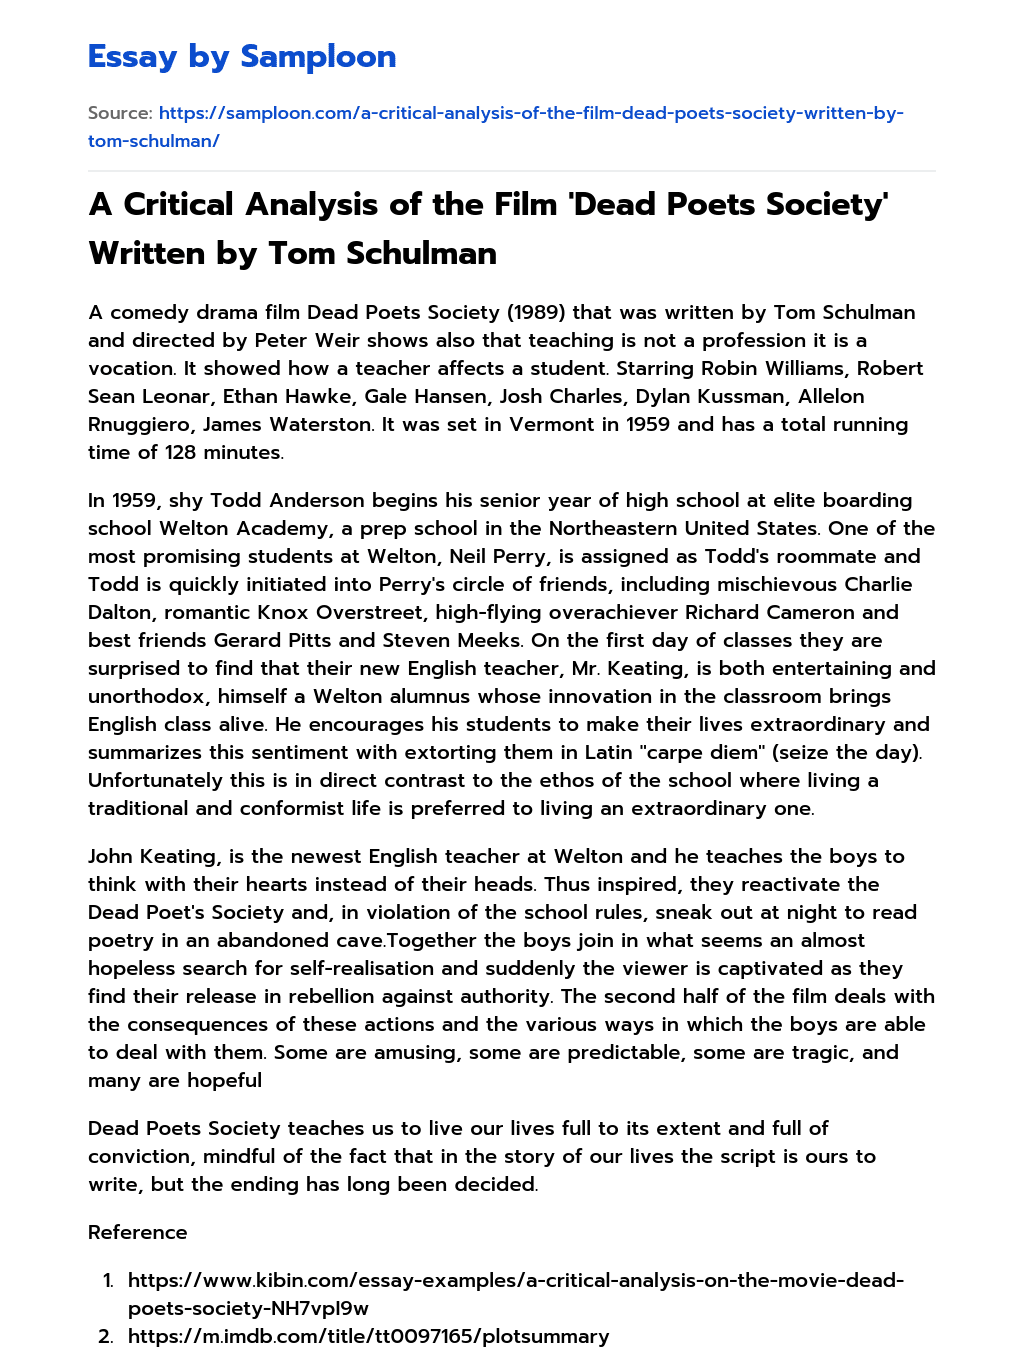 A Critical Analysis of the Film ‘Dead Poets Society’ Written by Tom Schulman essay